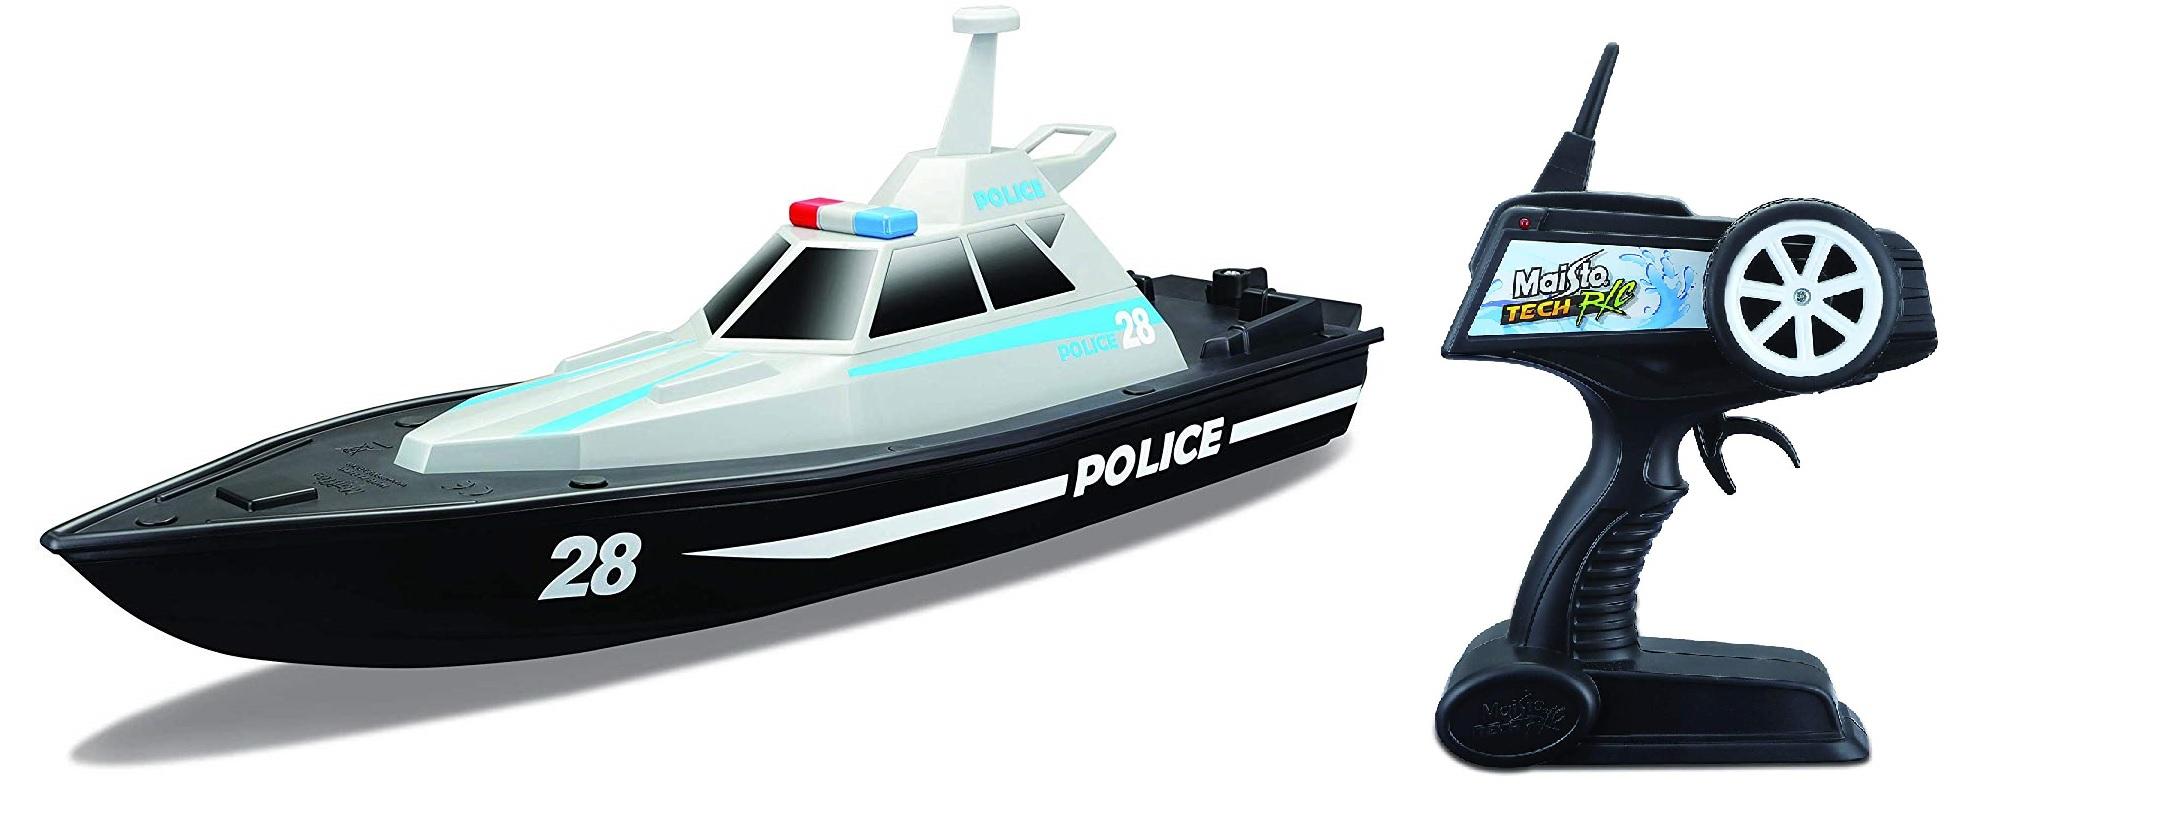 Maisto Police Boat: Endless Imaginative Play and Excitement with the Maisto Police Boat